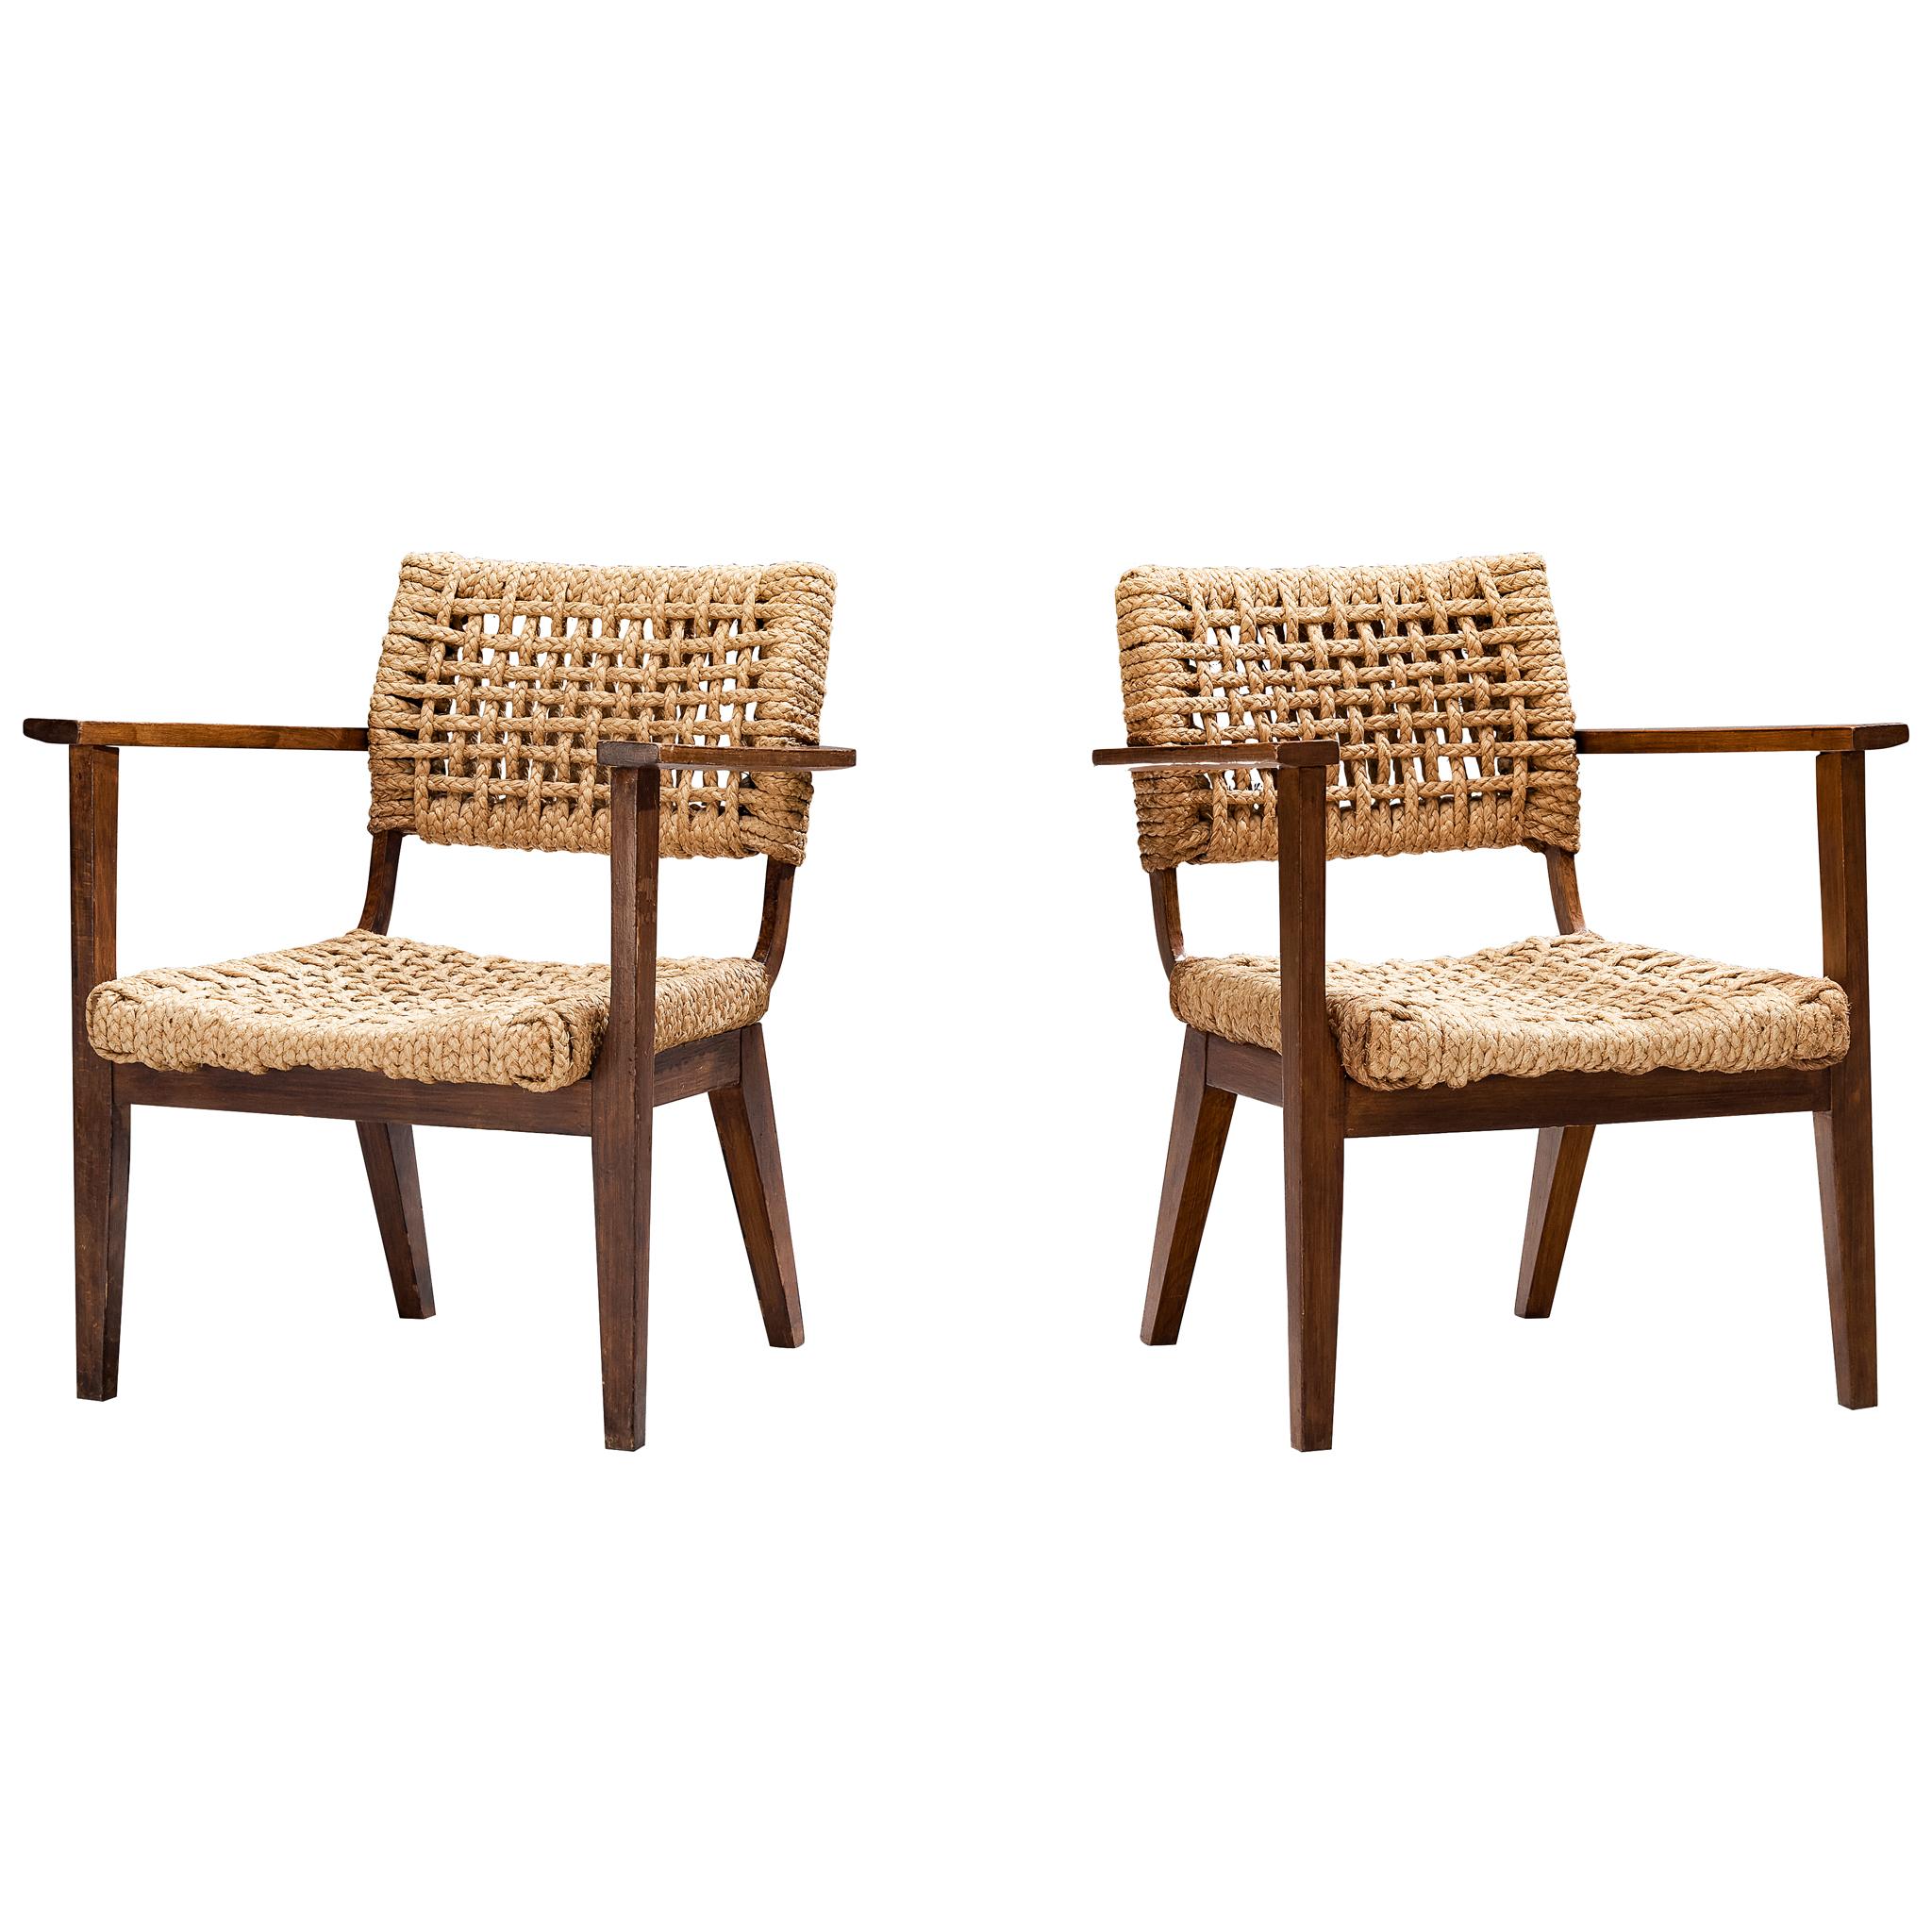 Adrian & Frida Minet for Vibo Pair of Armchairs in Wicker Straw  For Sale